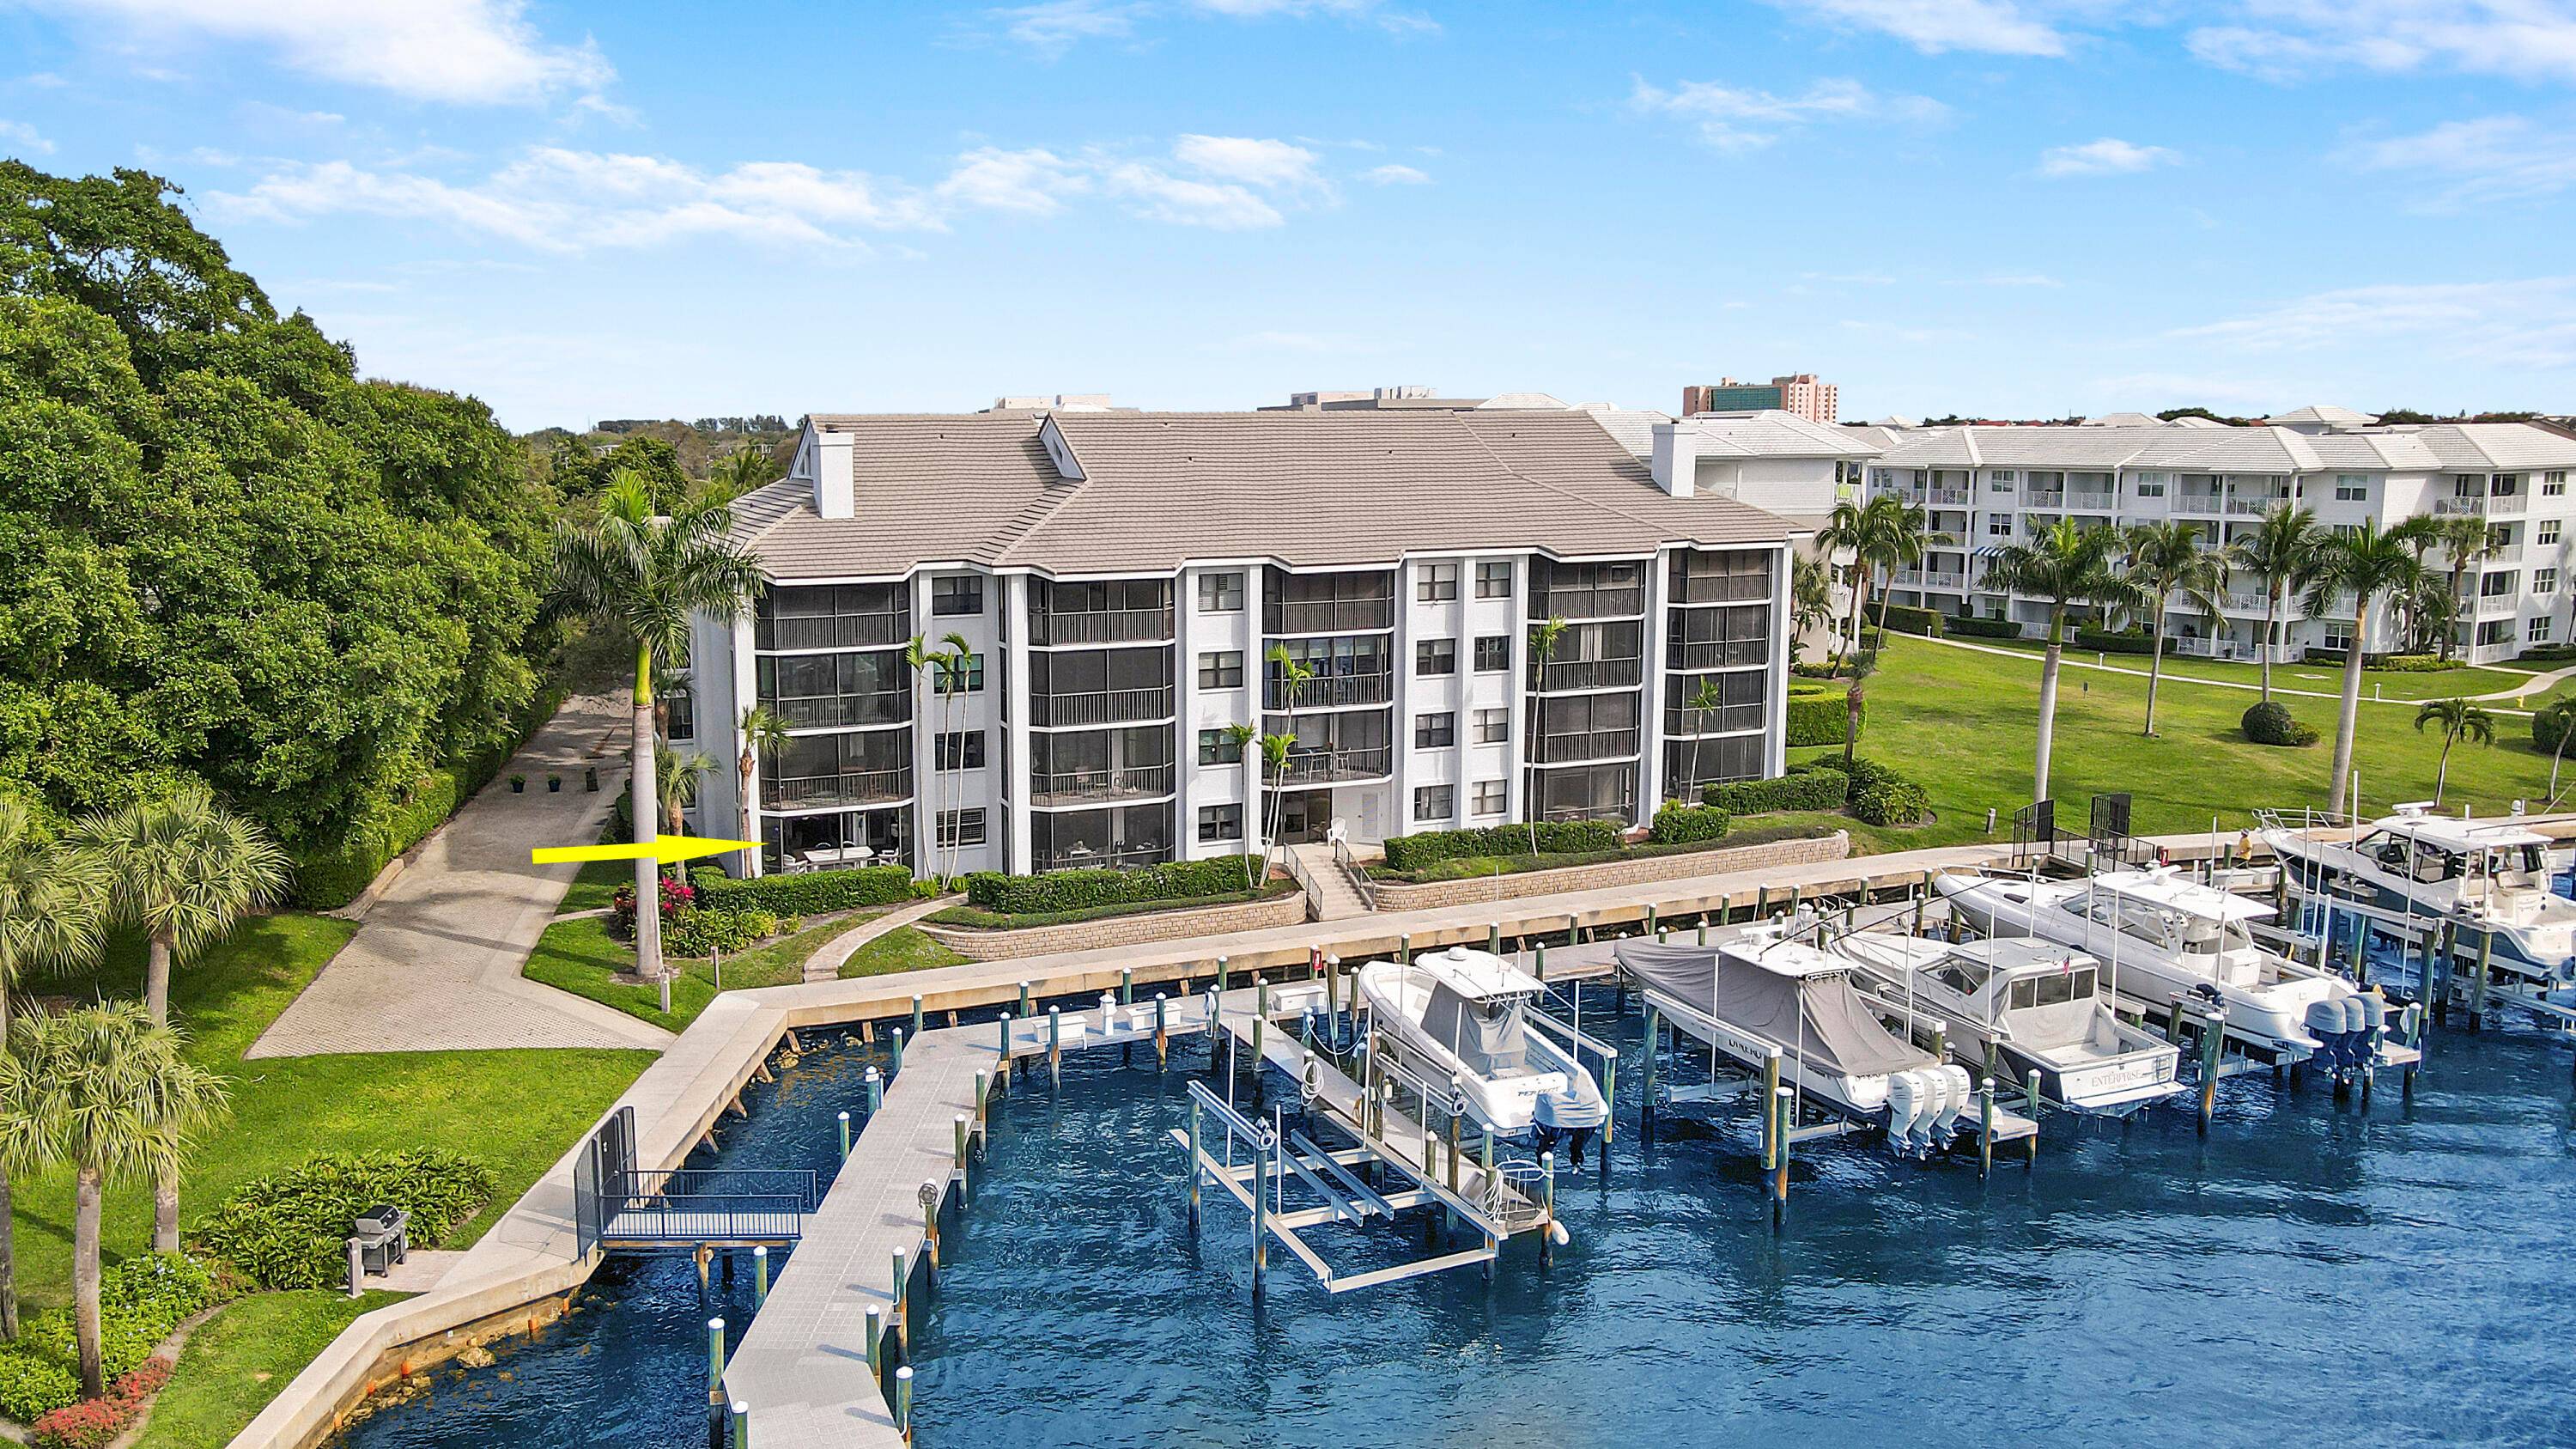 Rarely available, fully renovated 3 bed 2 bath end unit in Bay Colony with unobstructed intracoastal marina views !